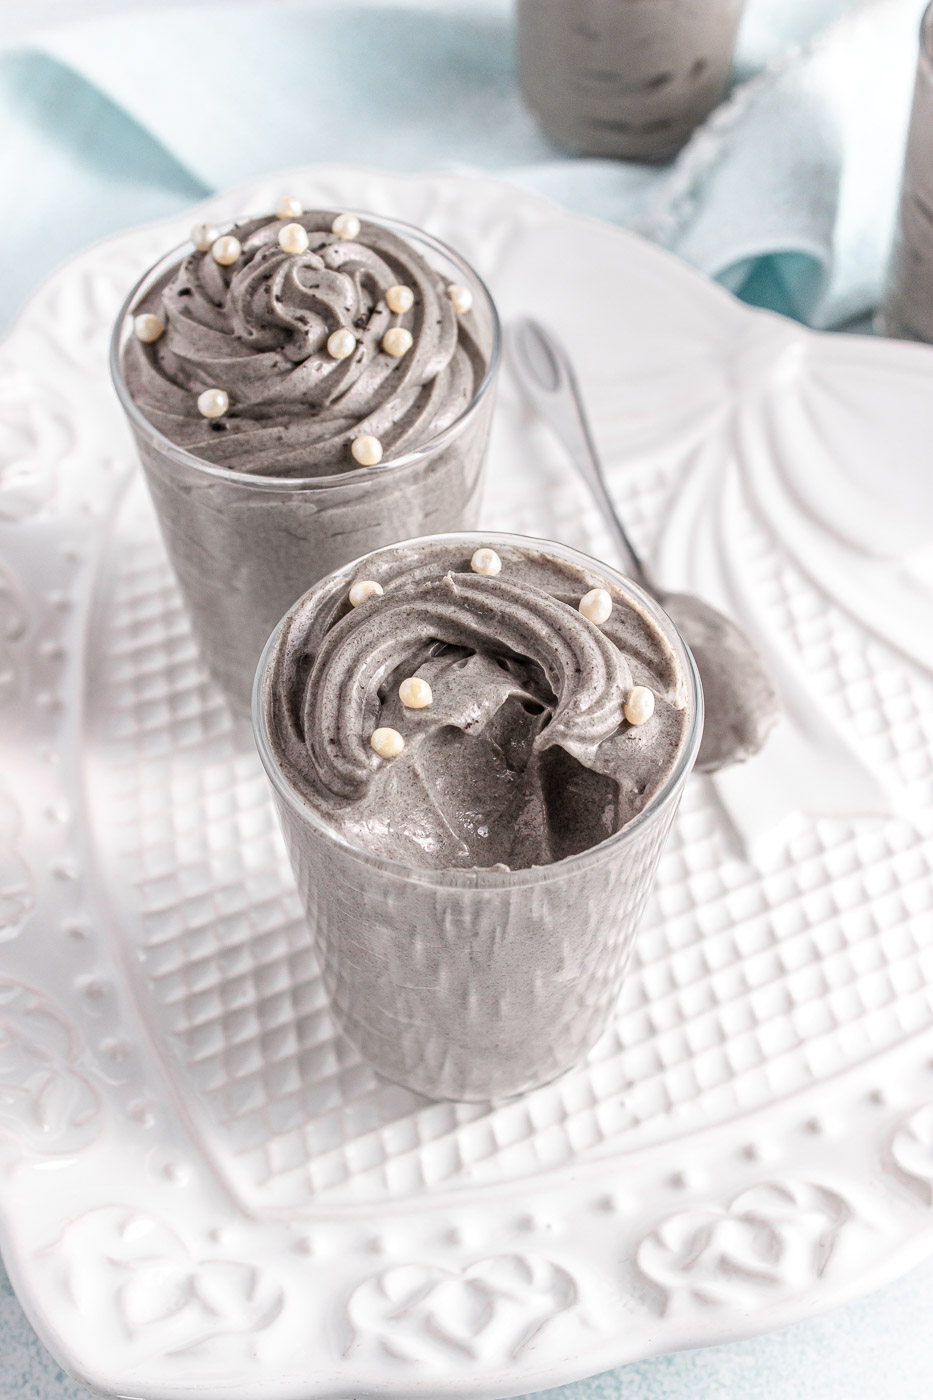 Glass jars are filled with piped and swirled grey stuff dessert topped with white sprinkles. One of the desserts has a spoonful removed from it